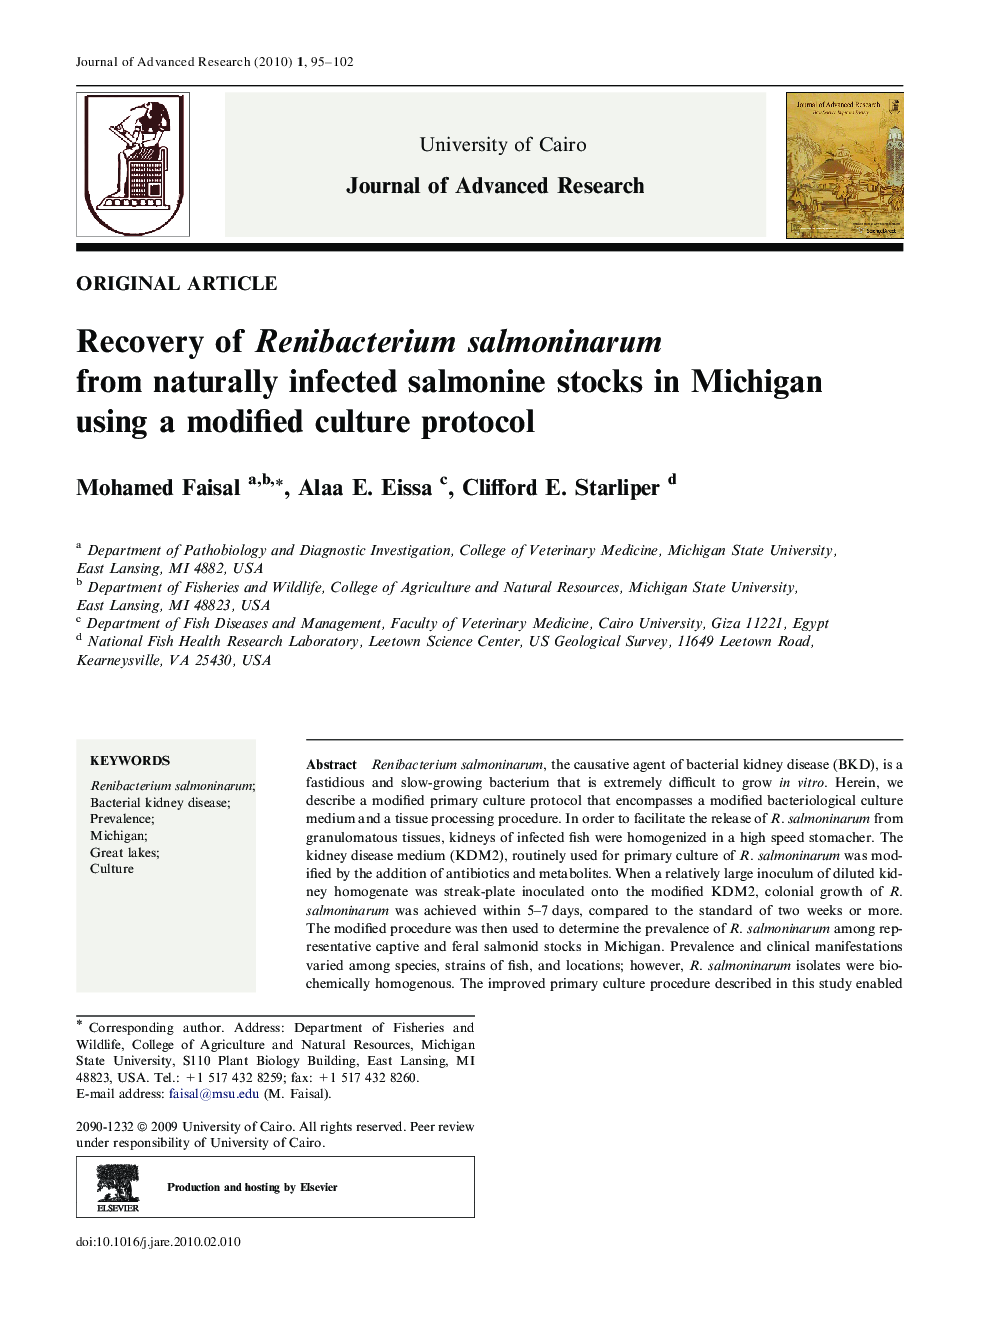 Recovery of Renibacterium salmoninarum from naturally infected salmonine stocks in Michigan using a modified culture protocol